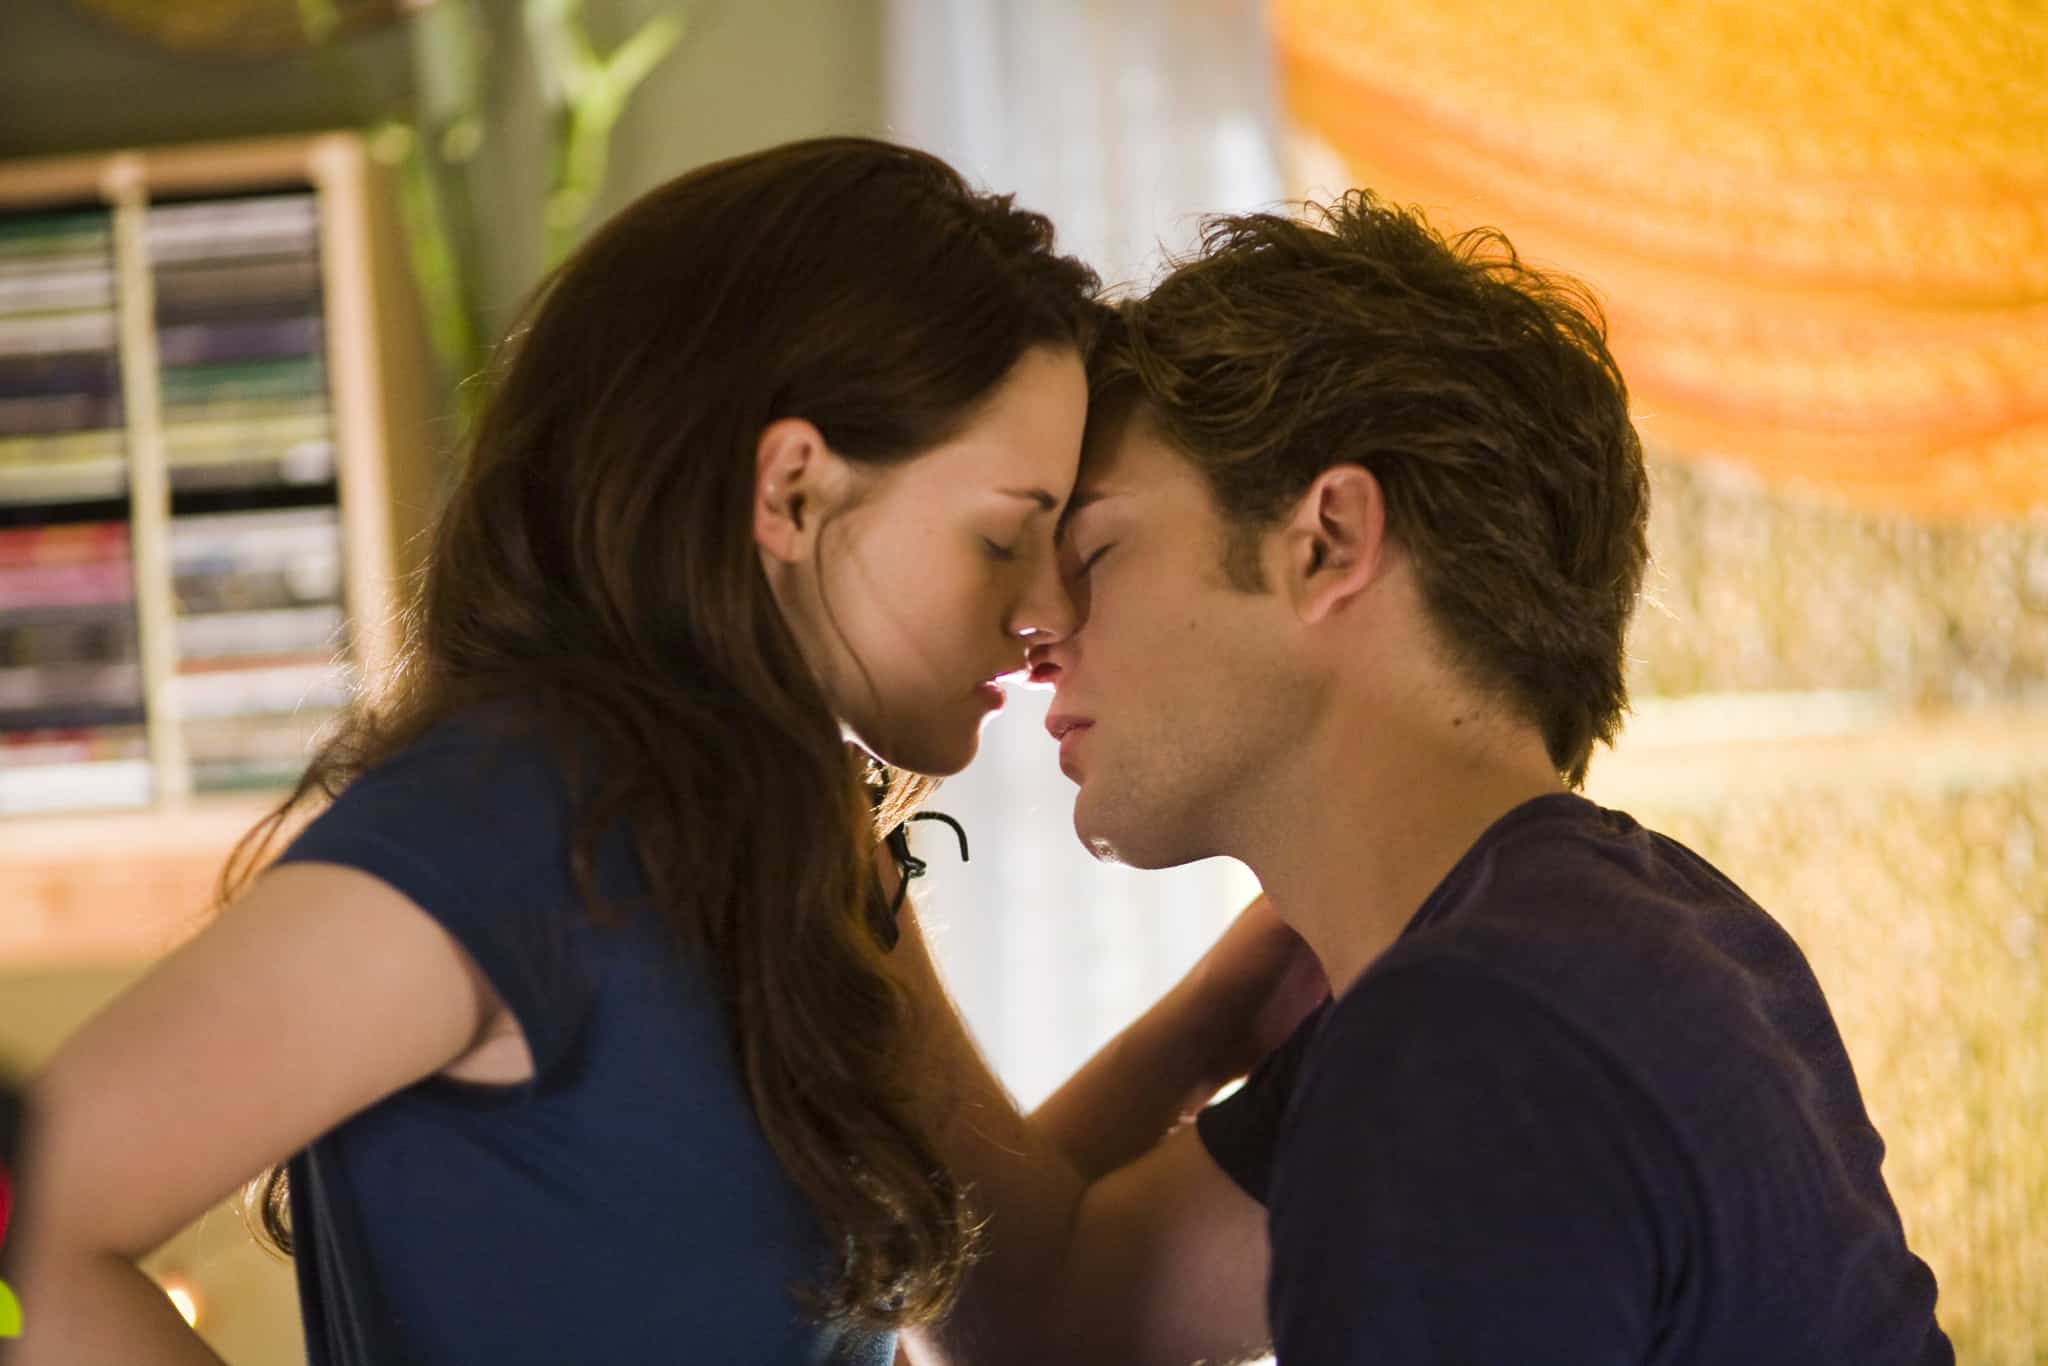 A teen girl and boy go in for a kiss in this image from Summit Entertainment.